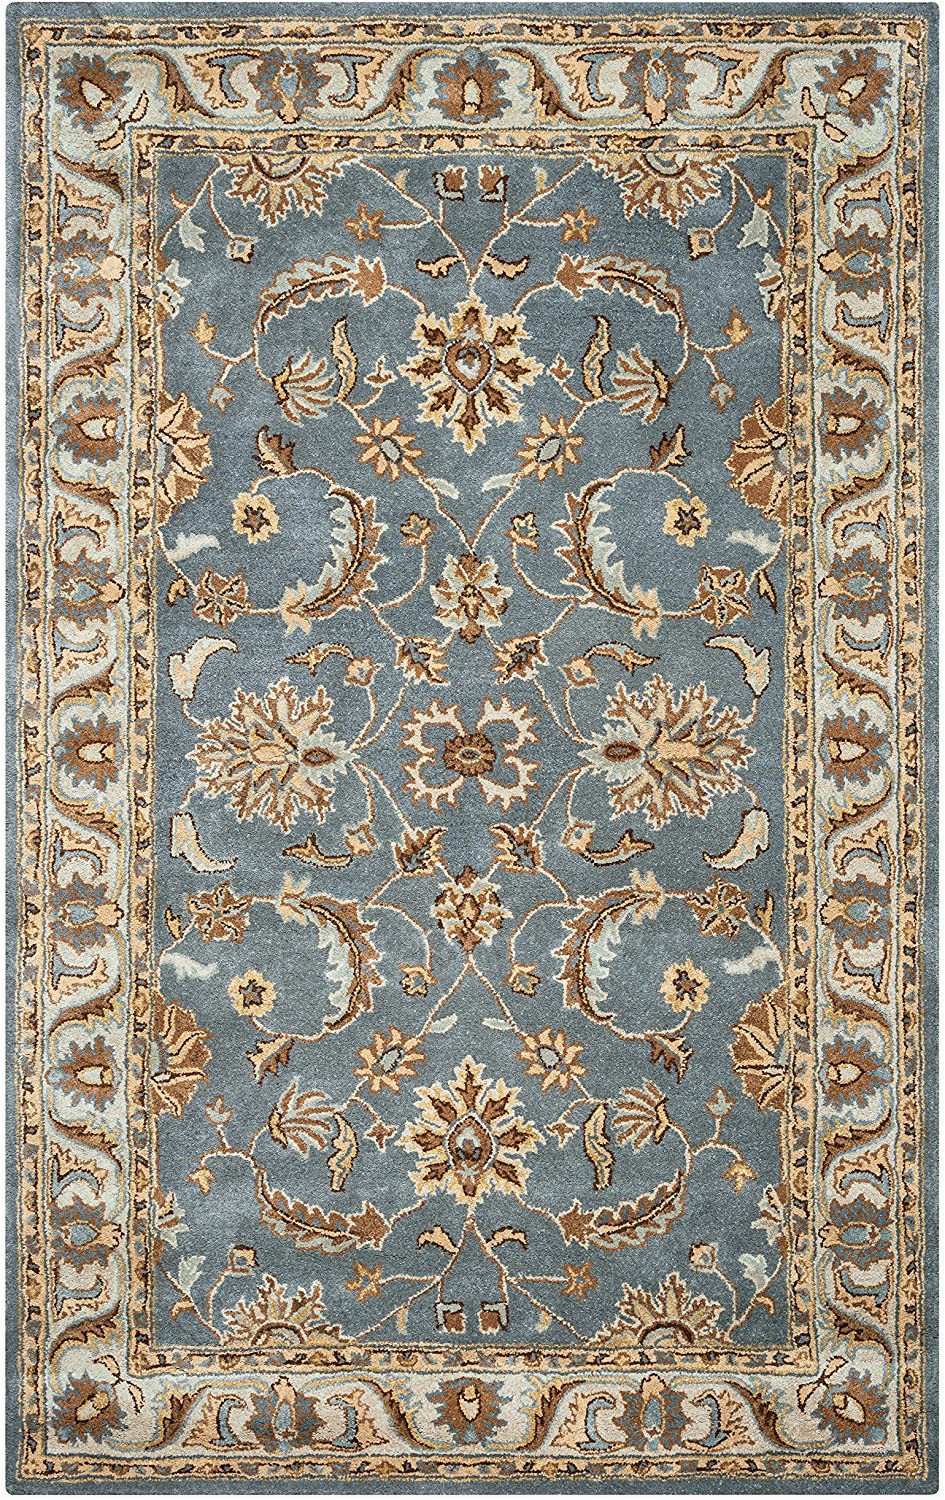 Teal and Brown area Rug 8×10 Rizzy Home Volare Collection Wool area Rug 8 X 10 Blue Brown Tan Blue Lt Teal Lt Brown Border